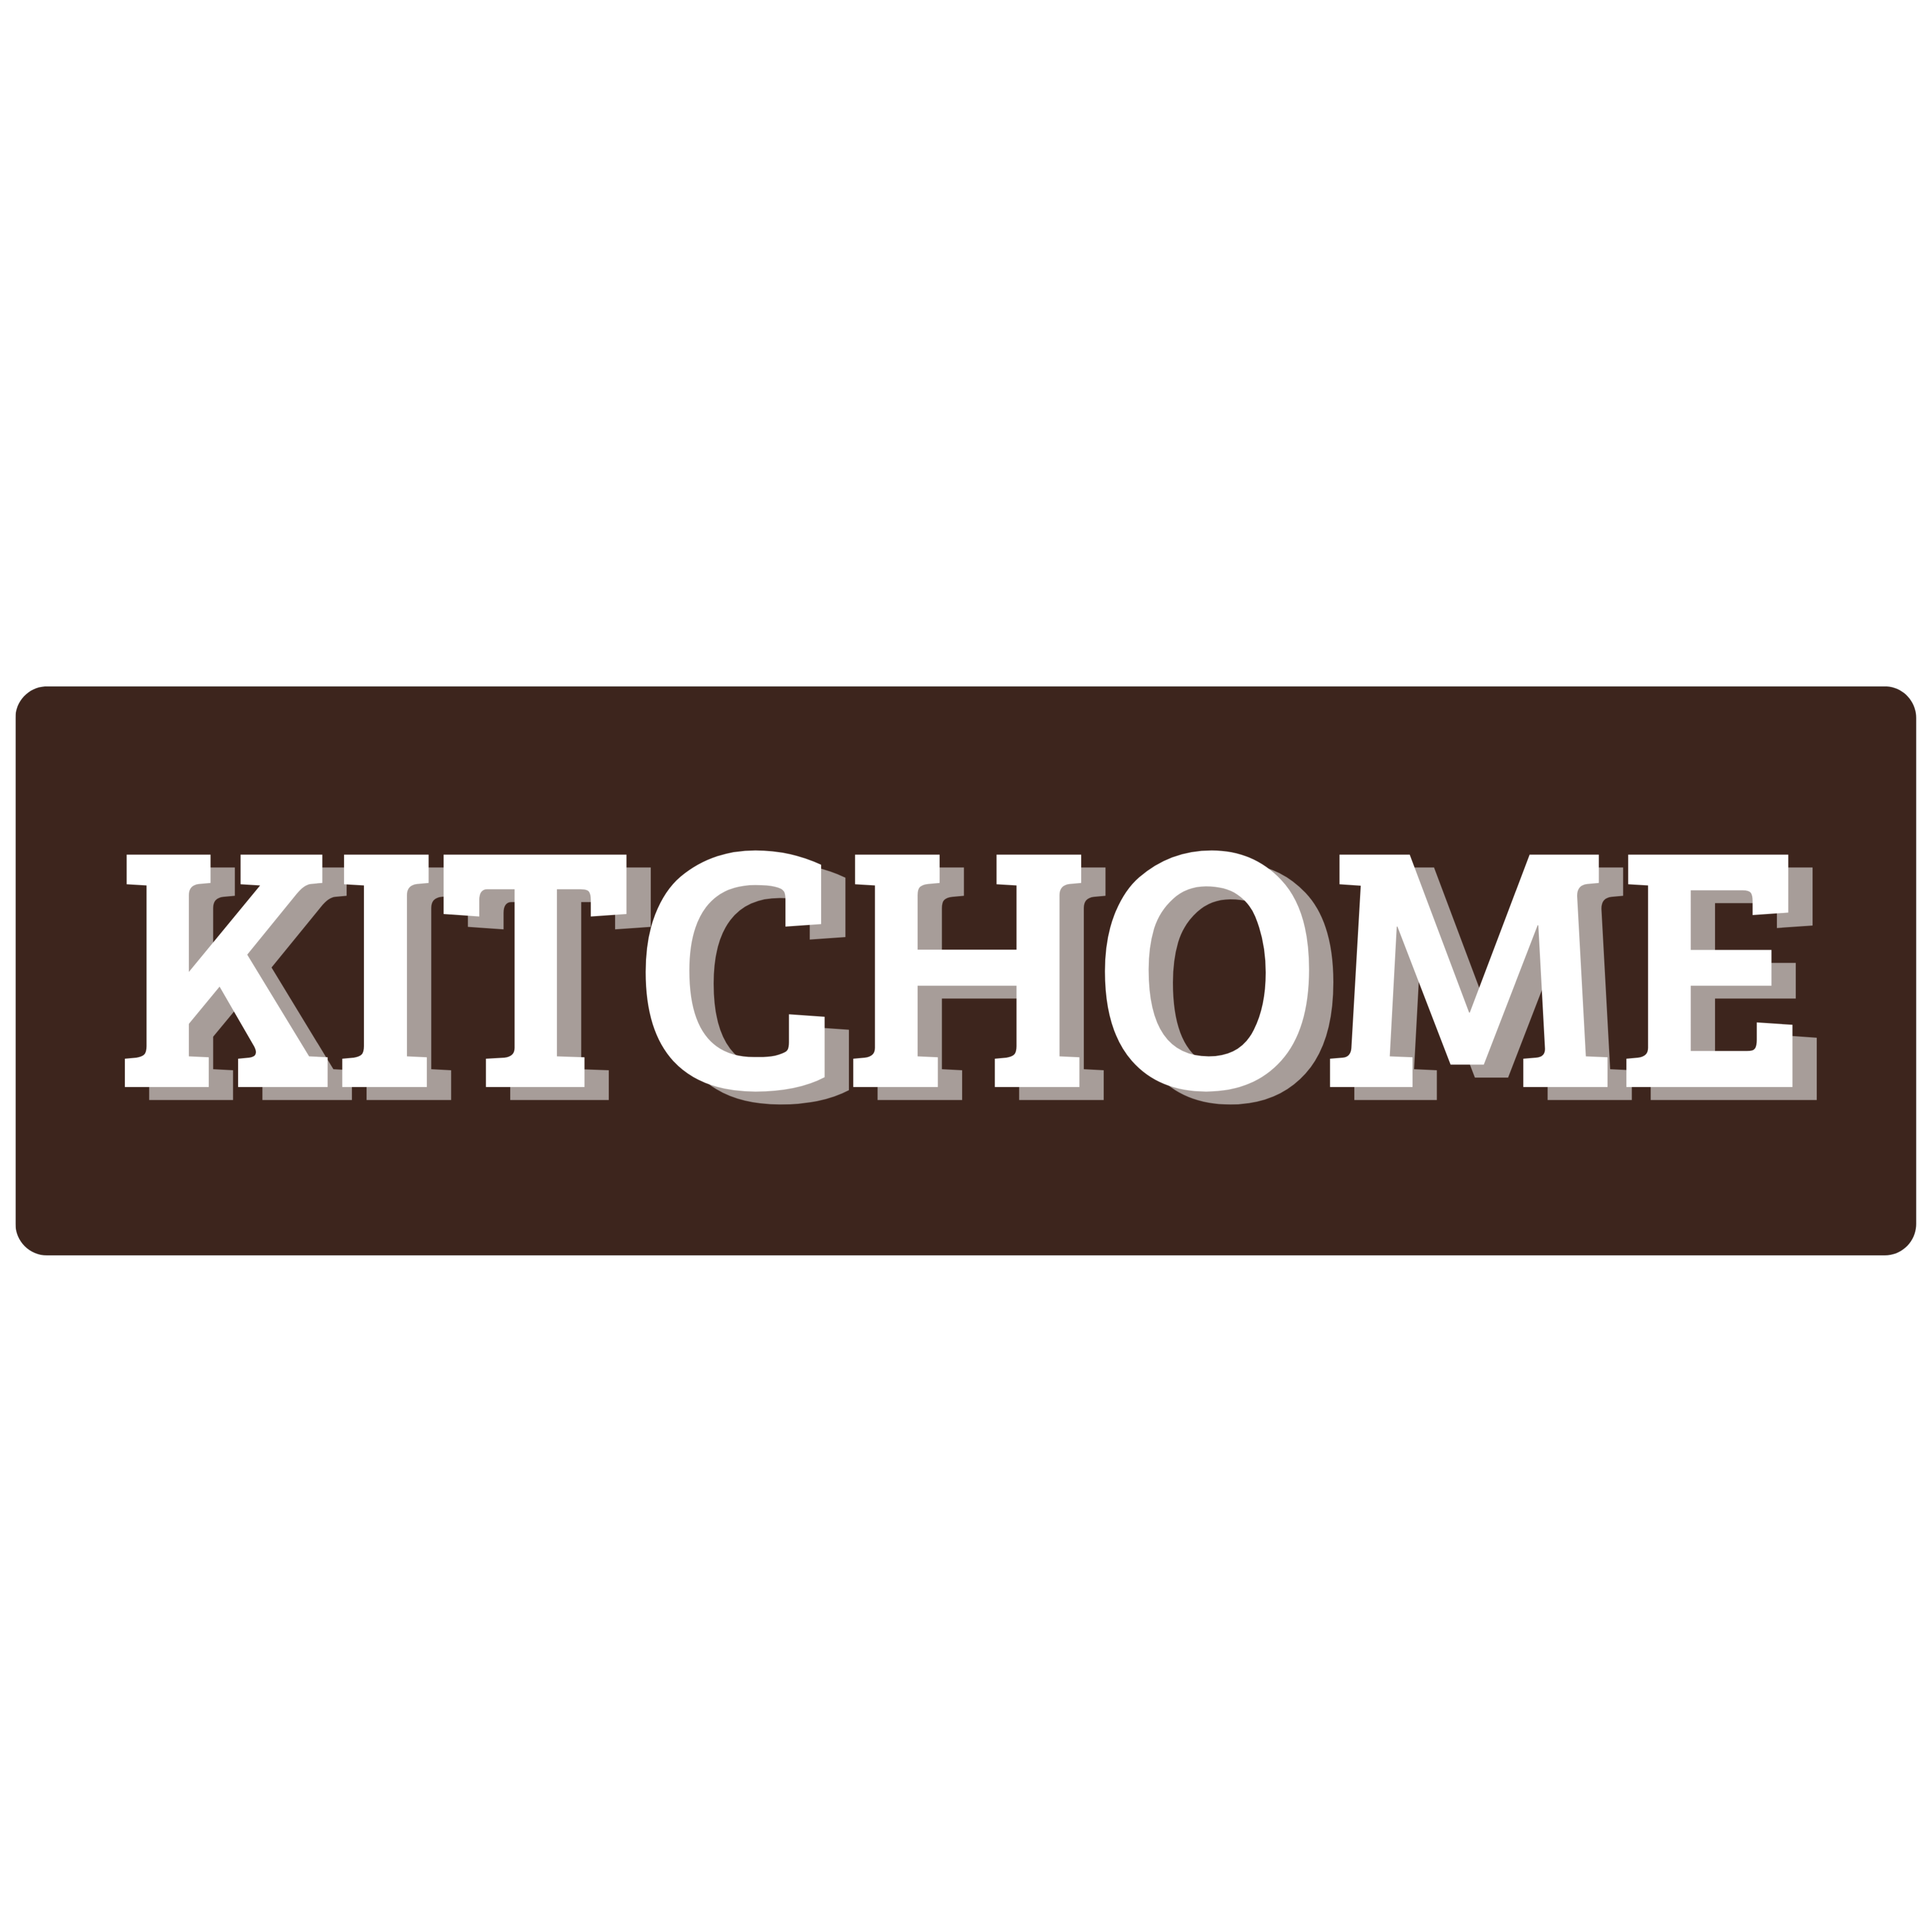 Kitchome